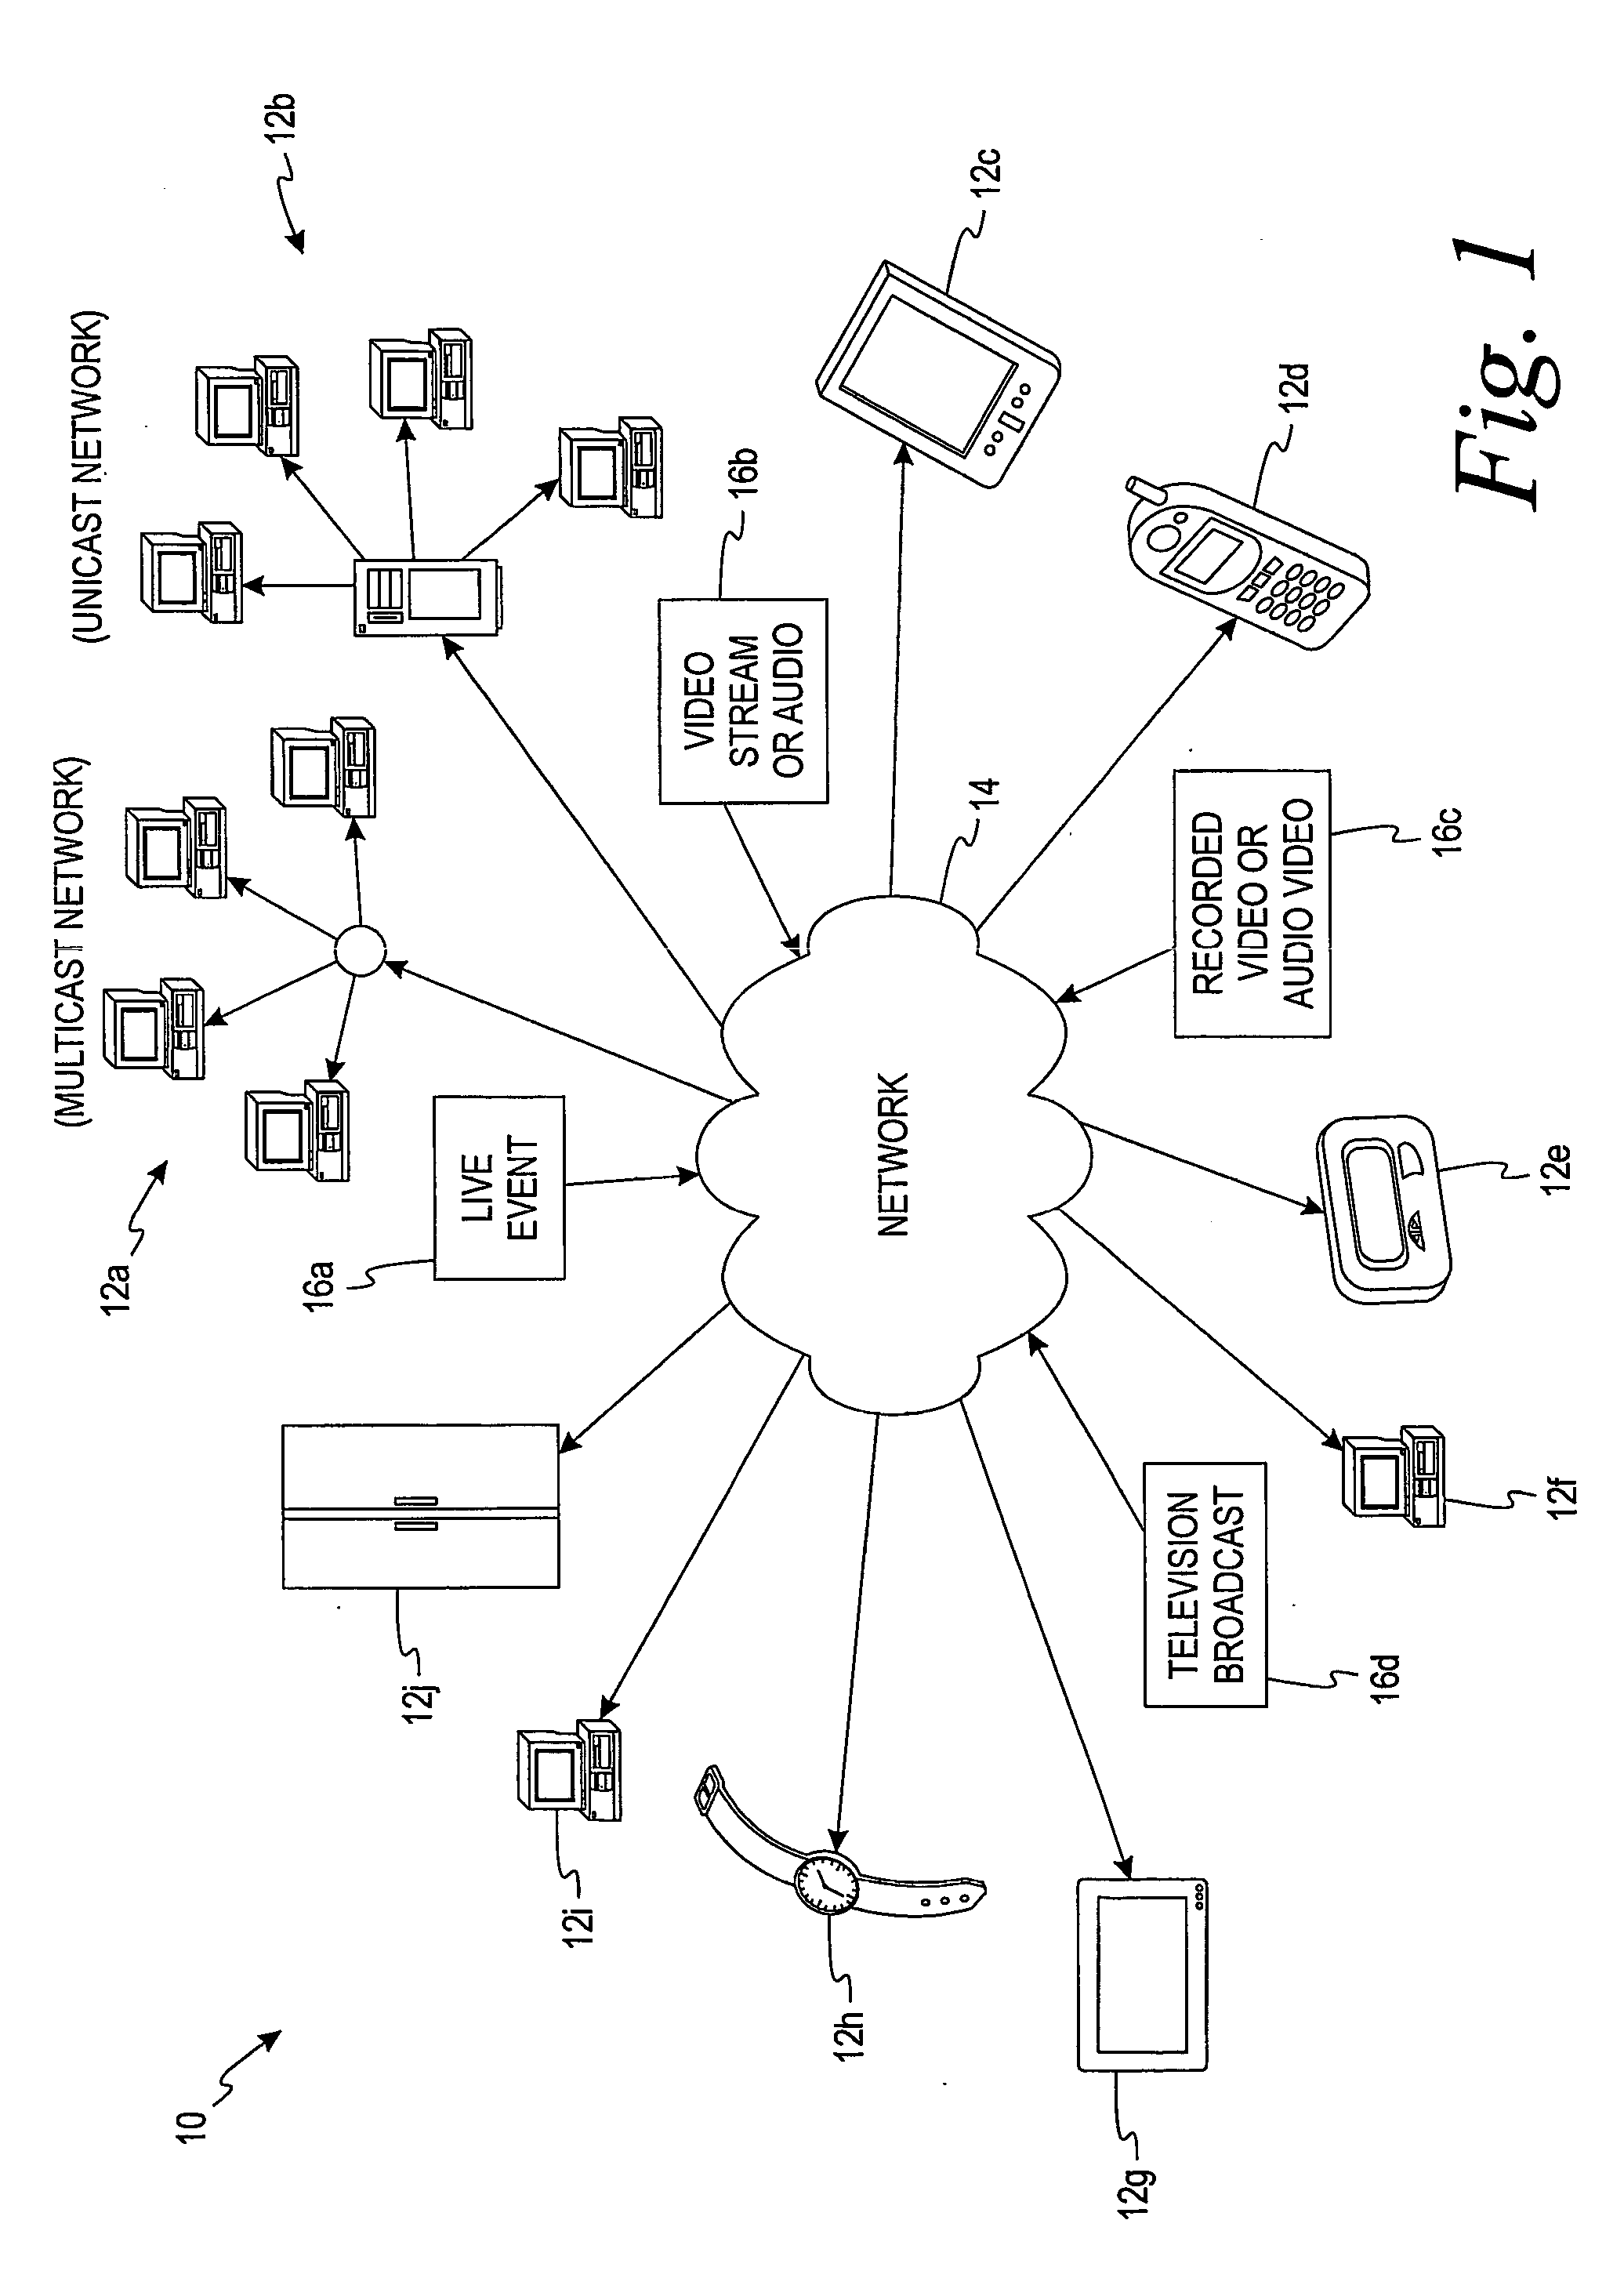 Digital content delivery and viewing system and method